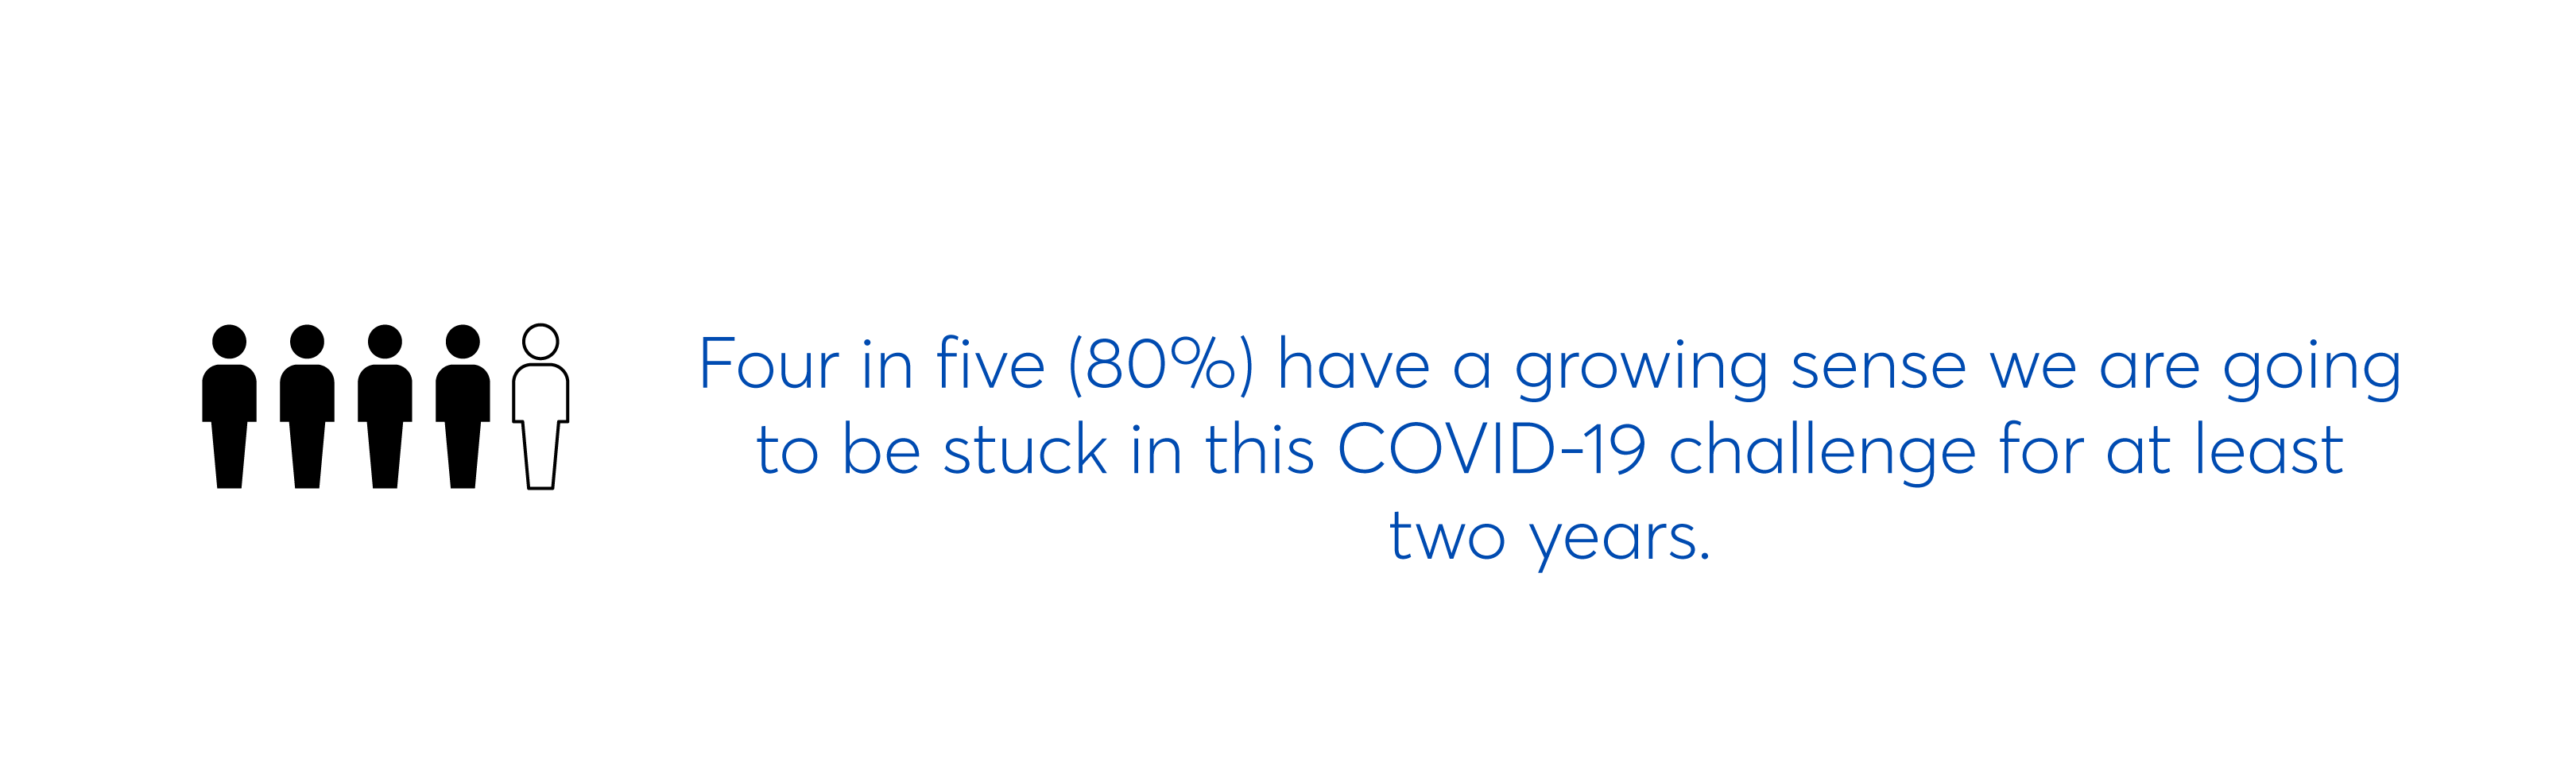 4 in 5 have growing sense we are going to be stuck in COVID-19 for next two years